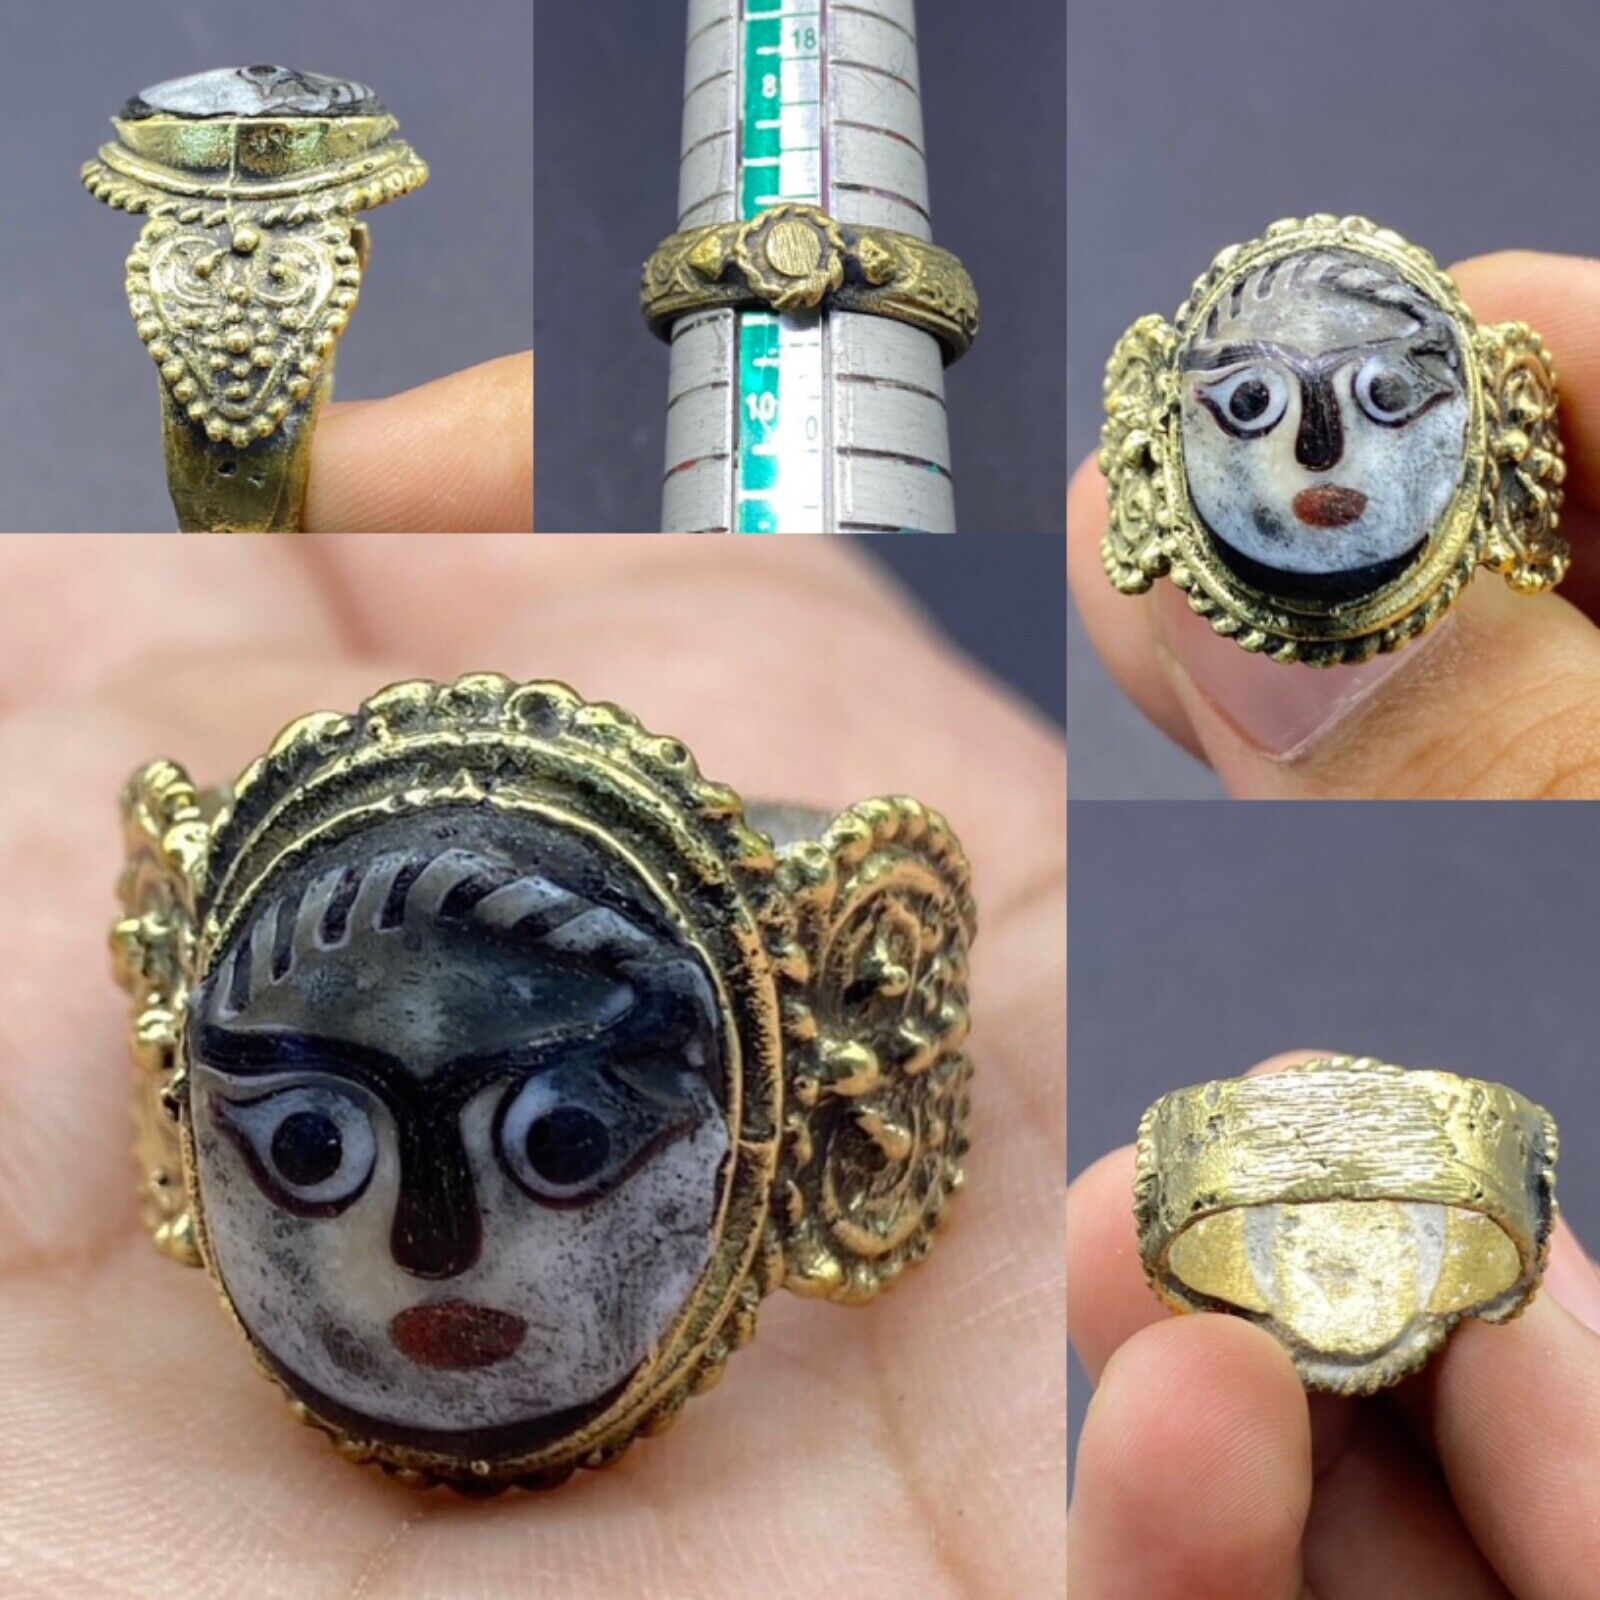 Rare Ethnic Near Eastern Tradition Jewelry’s Roman Mosaic Glass Face Bead Ring